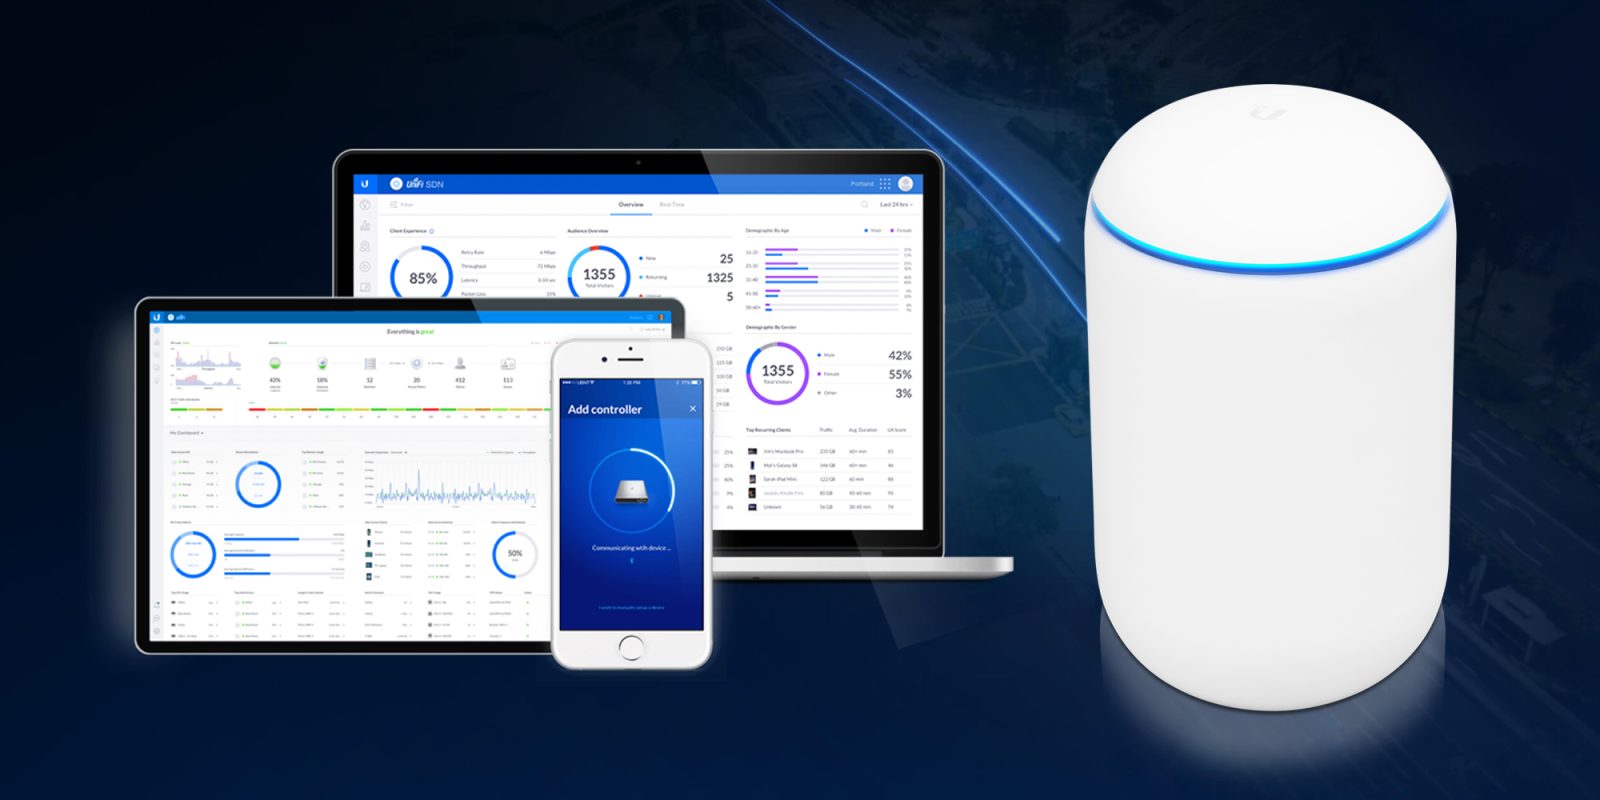 UniFi Dream Machine brings pro features to an AiO design 9to5Toys